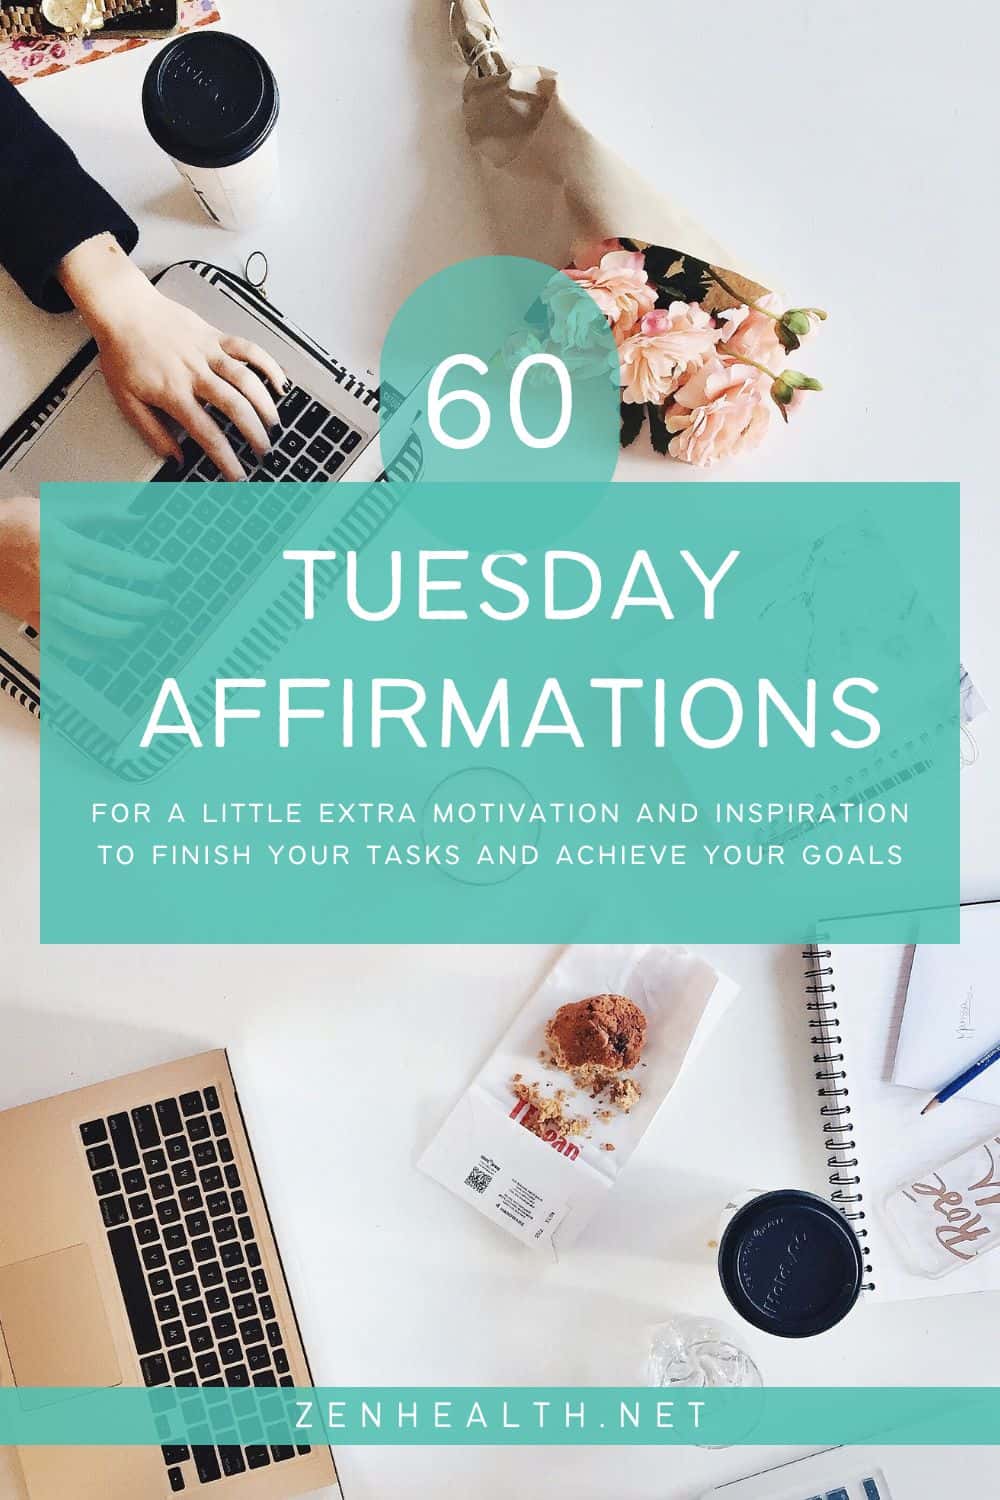 60 tuesday affirmations for a little extra motivation